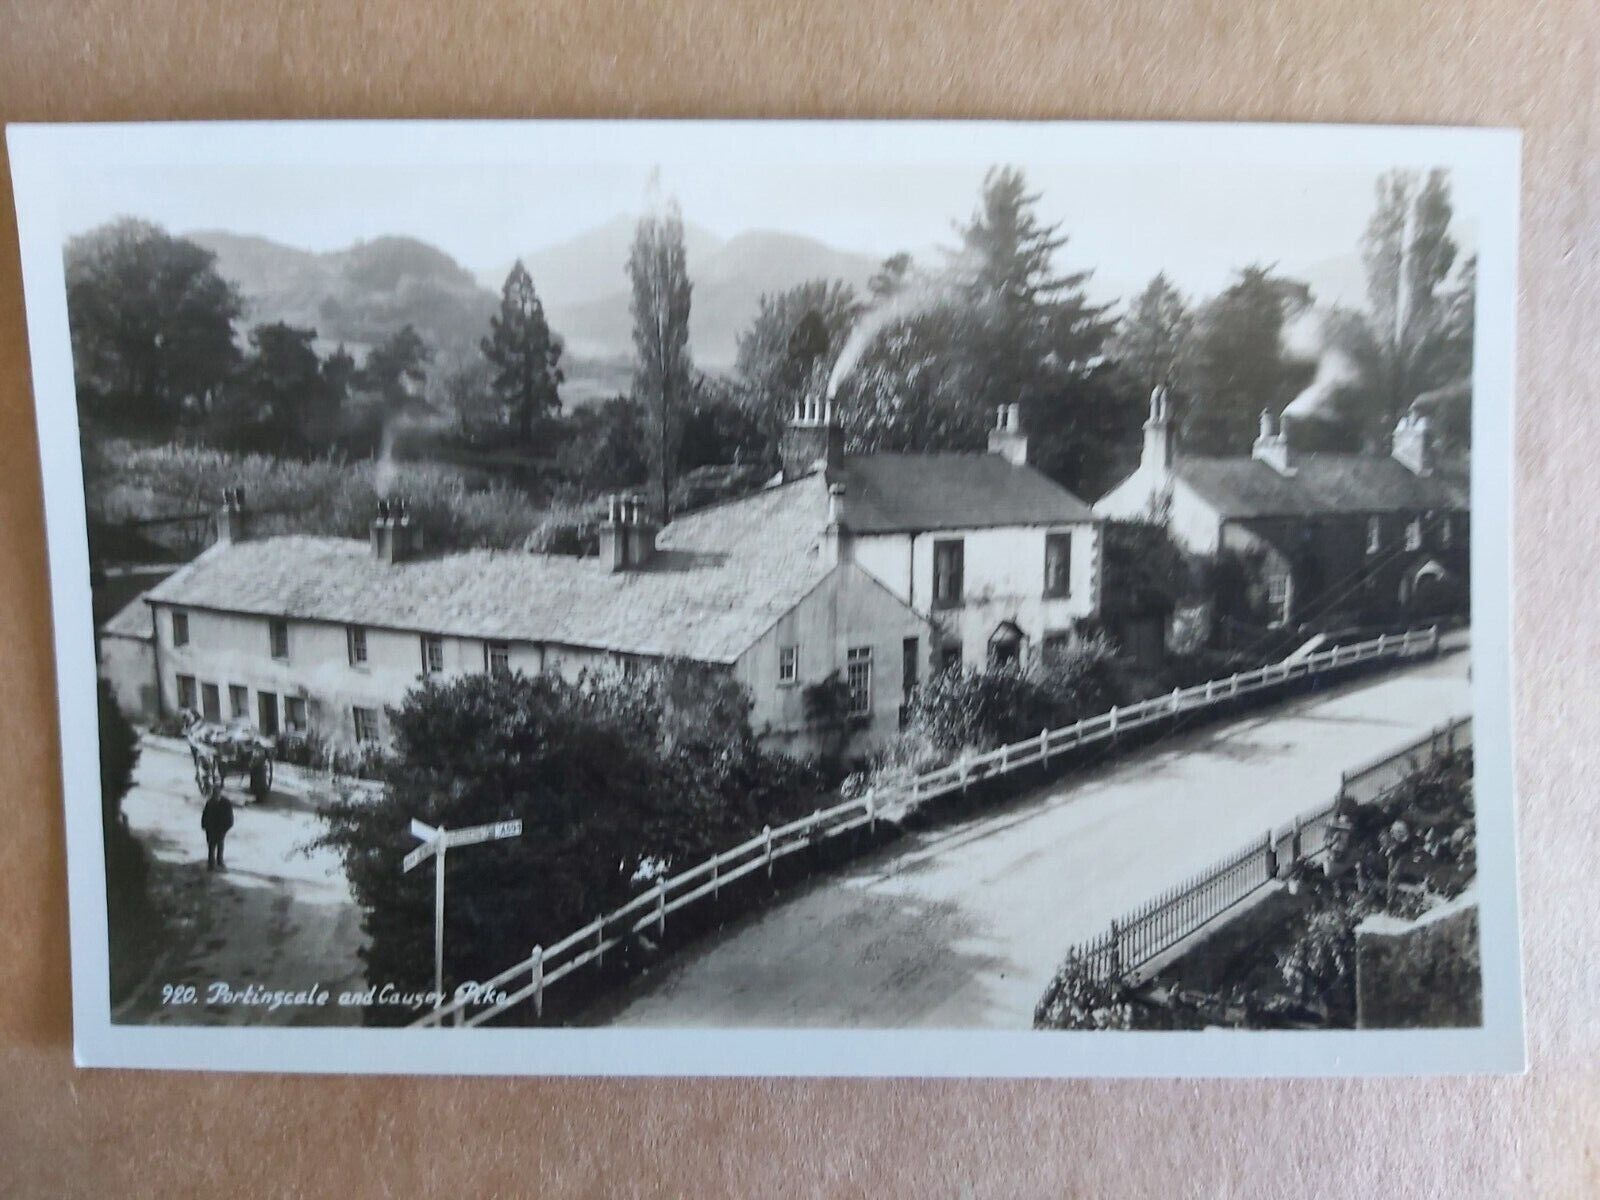 House Clearance - Portinscale and Causey Pike - Old service 1282